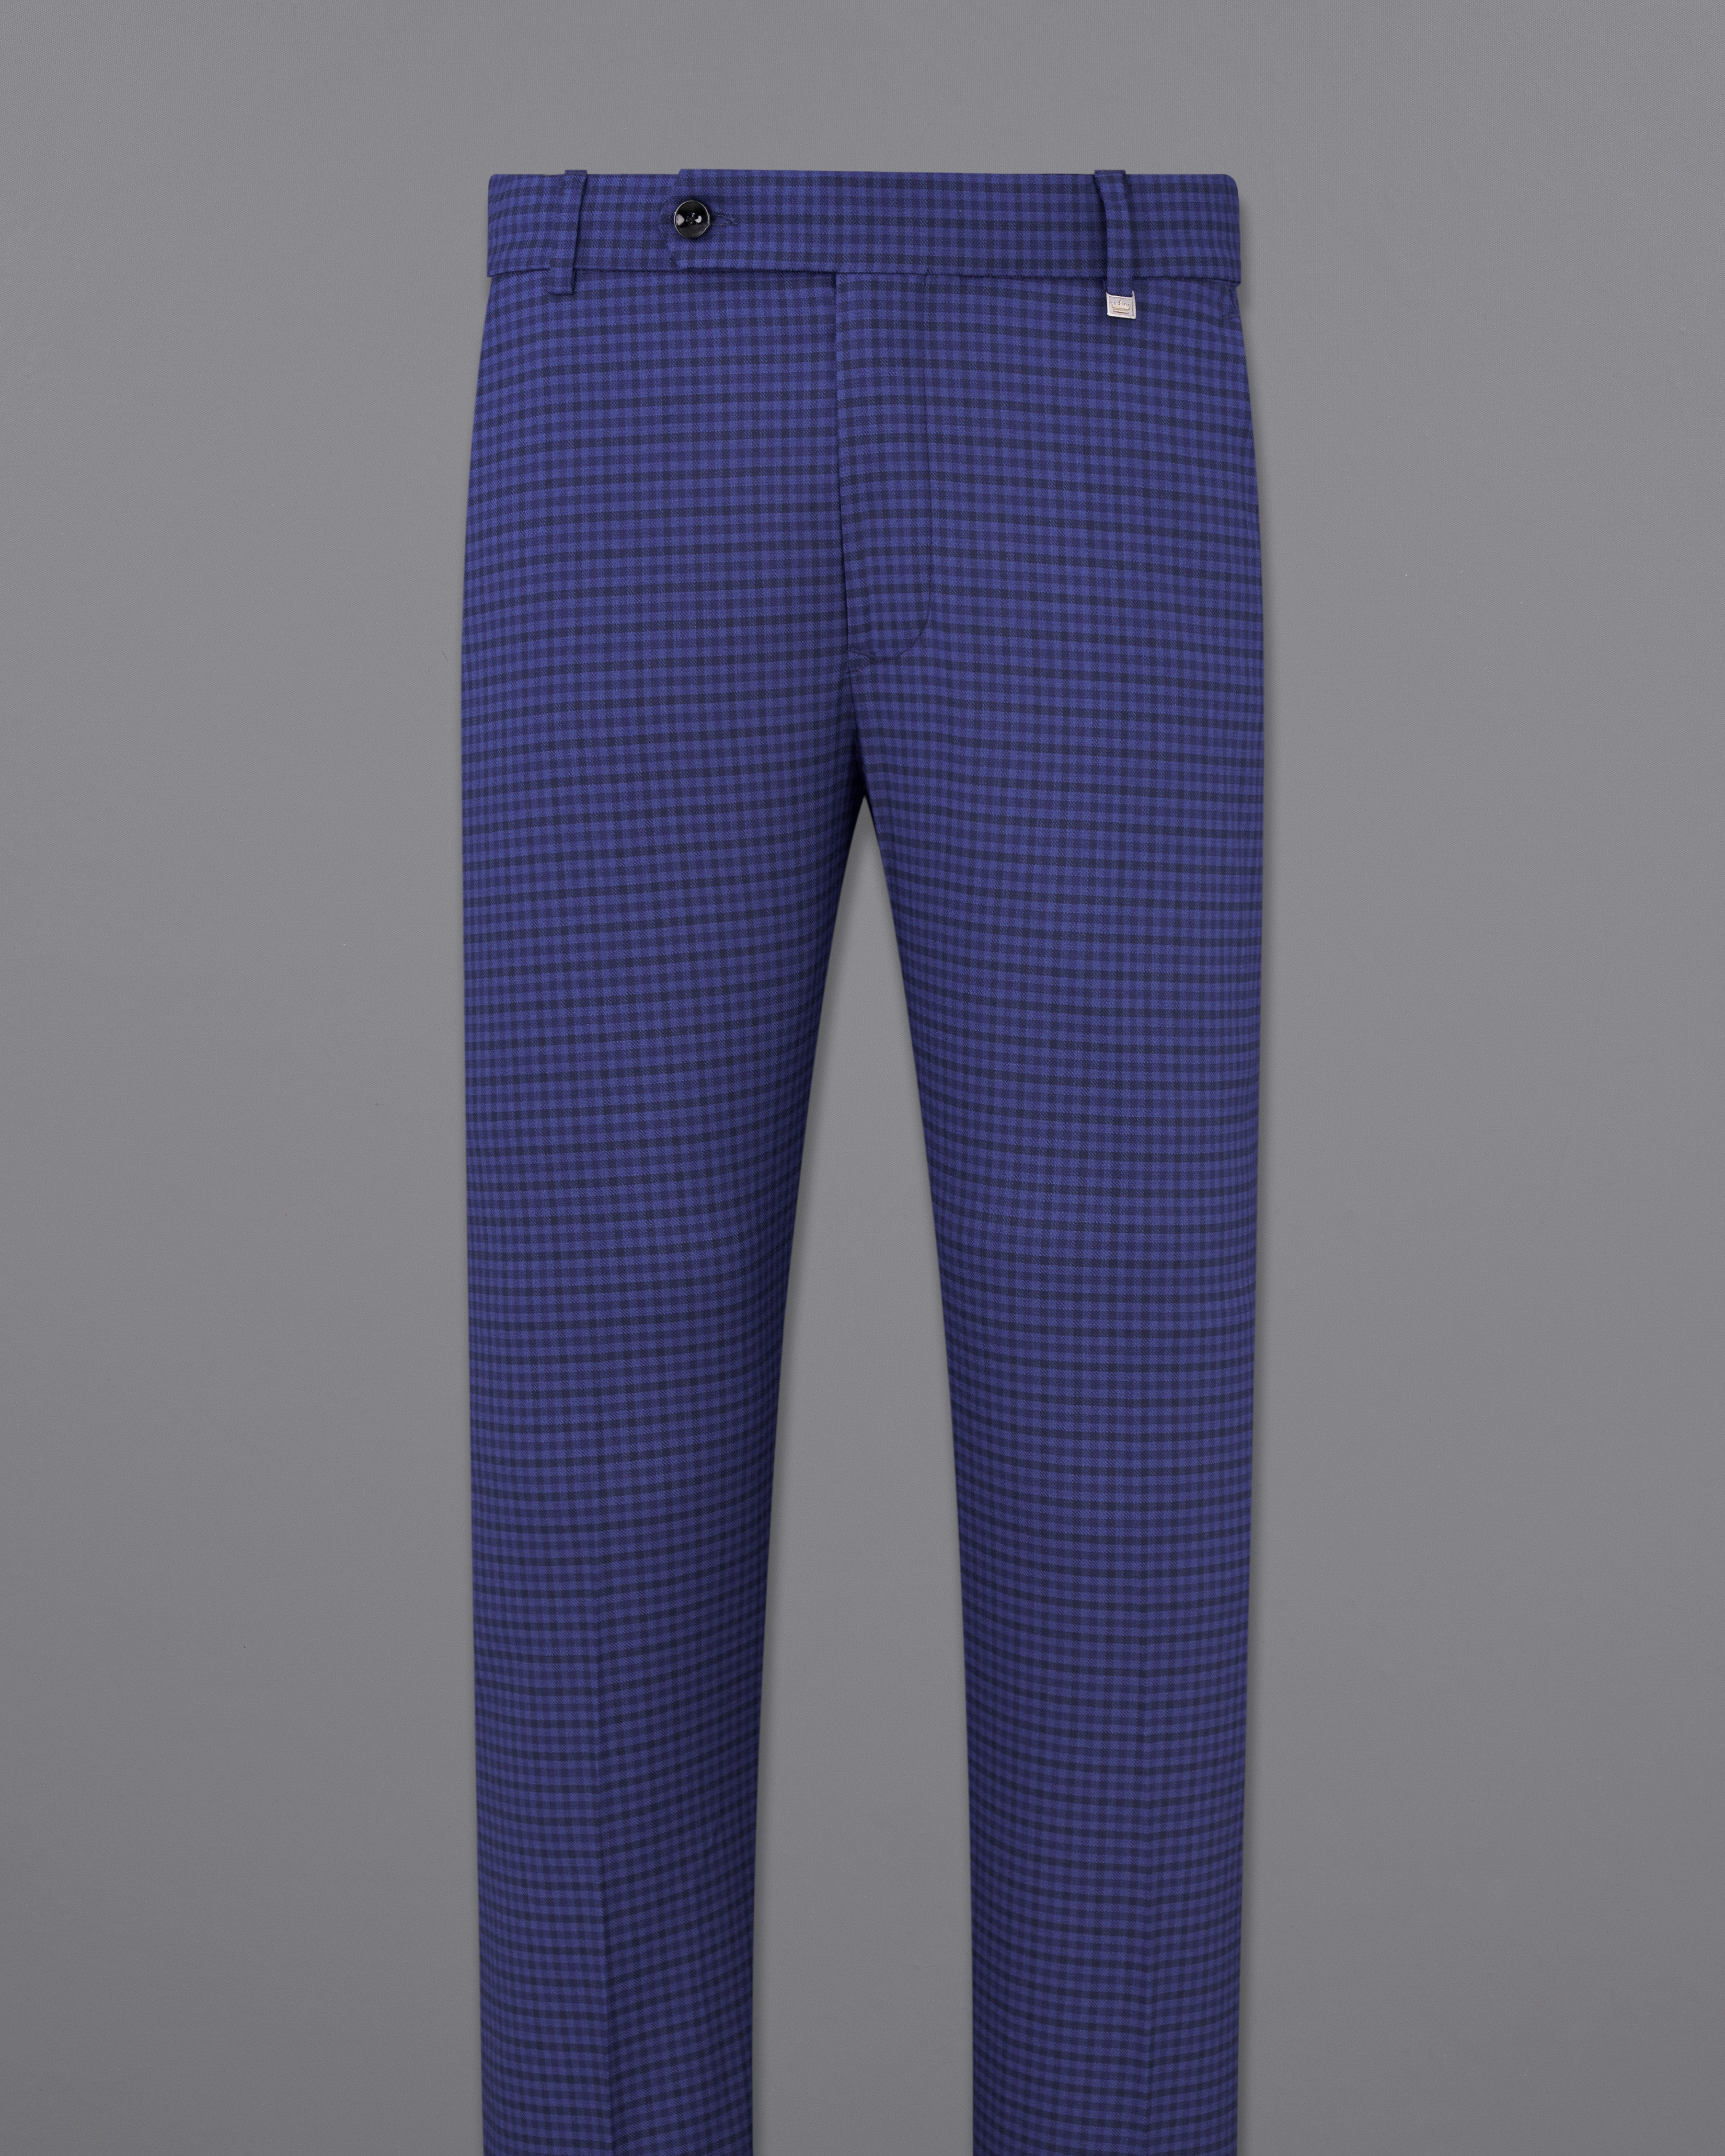 Victoria Blue Gingham Checkered Bandhgala Suit ST2496-BG-36, ST2496-BG-38, ST2496-BG-40, ST2496-BG-42, ST2496-BG-44, ST2496-BG-46, ST2496-BG-48, ST2496-BG-50, ST2496-BG-52, ST2496-BG-54, ST2496-BG-56, ST2496-BG-58, ST2496-BG-72